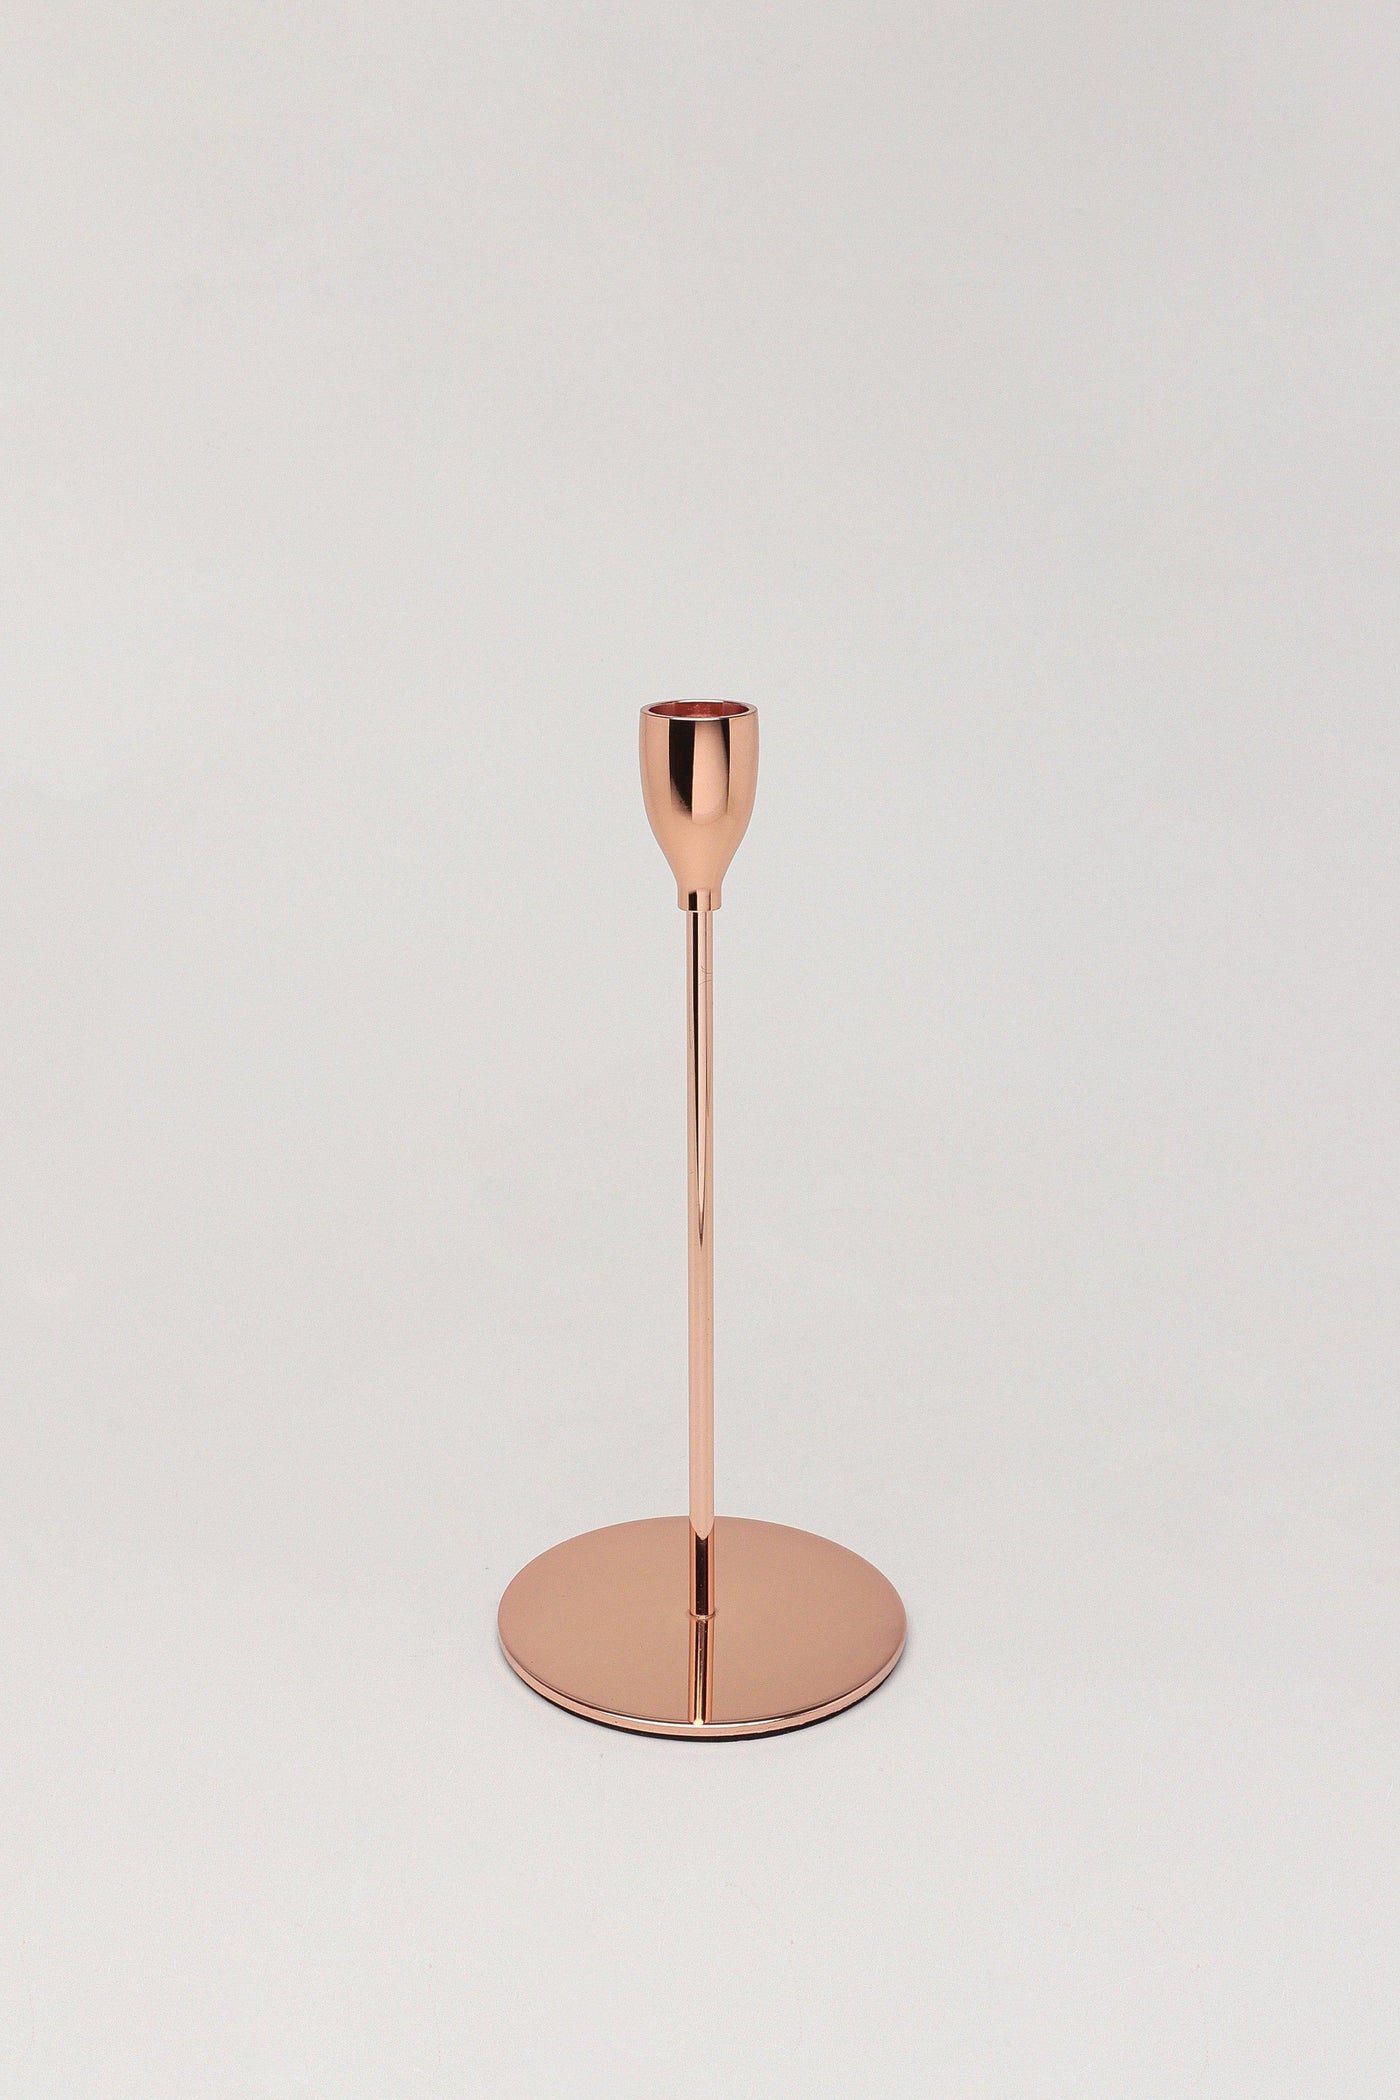 G Decor Candle Holders Rose gold Set Of Three Aldwin Copper Rose Gold Brass Metal Classic Dinner Candlesticks Taper Church Candle Holders